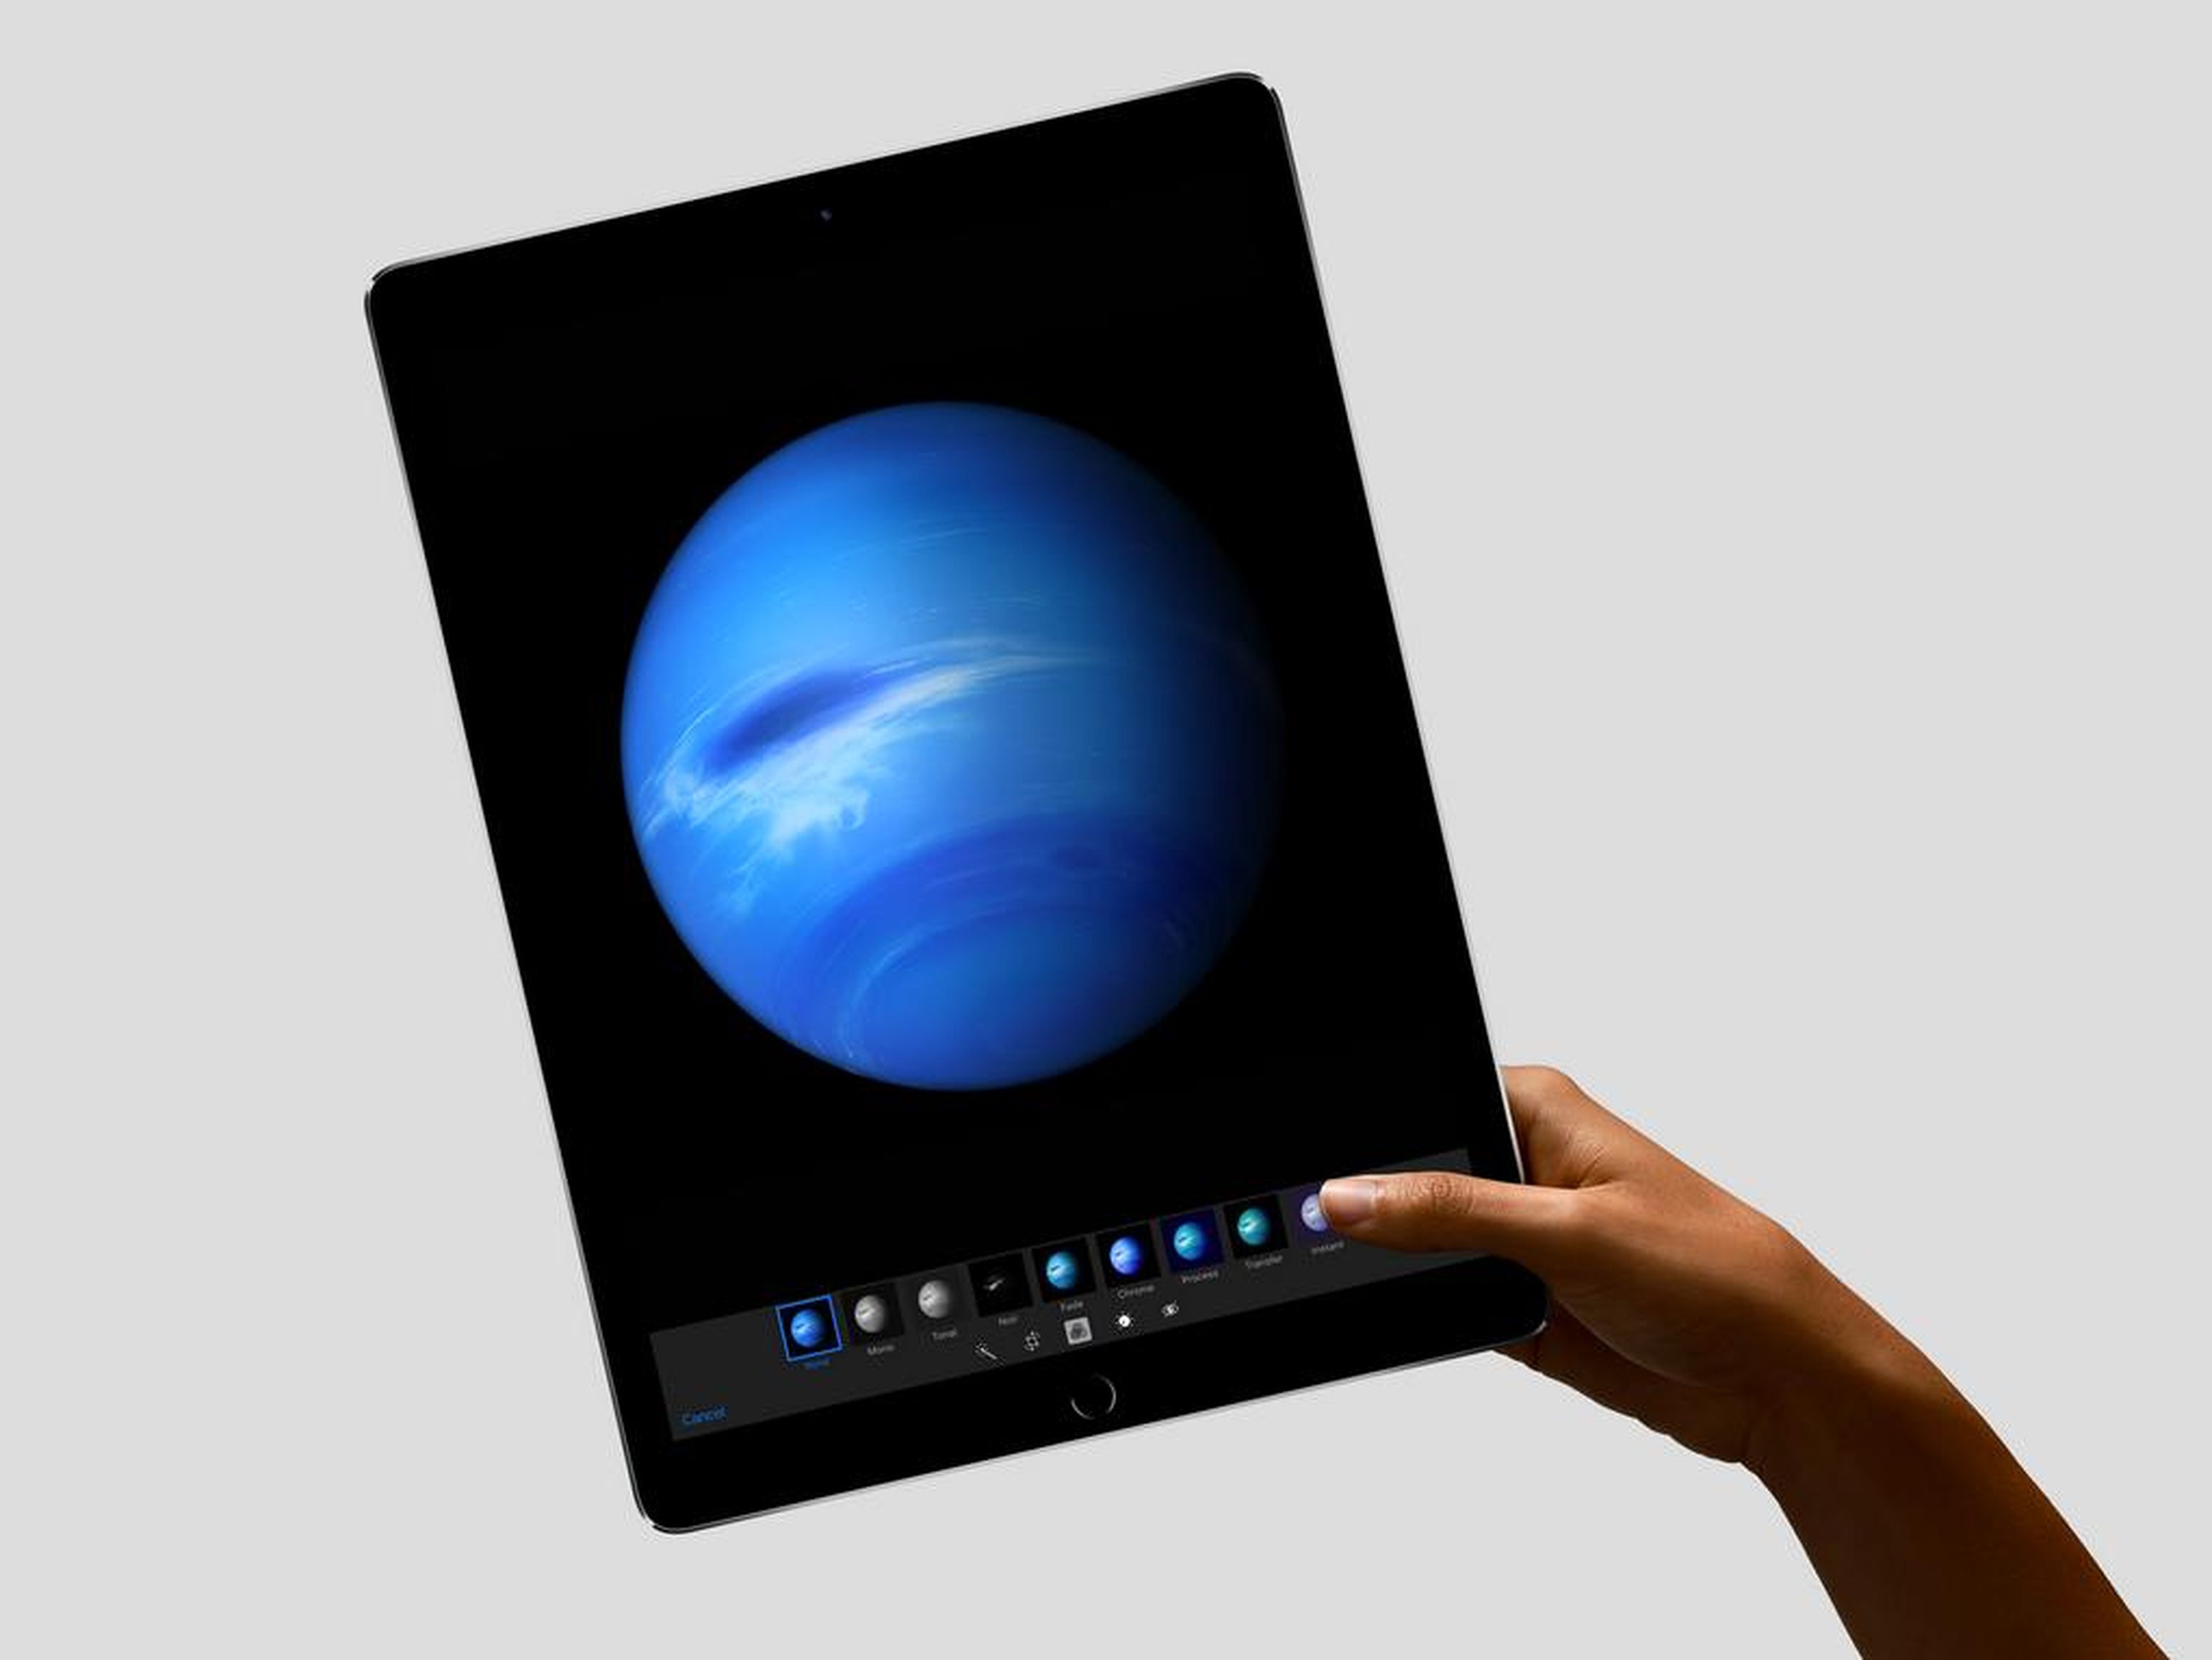 The iPad is getting new gestures for copy, paste, and other actions.